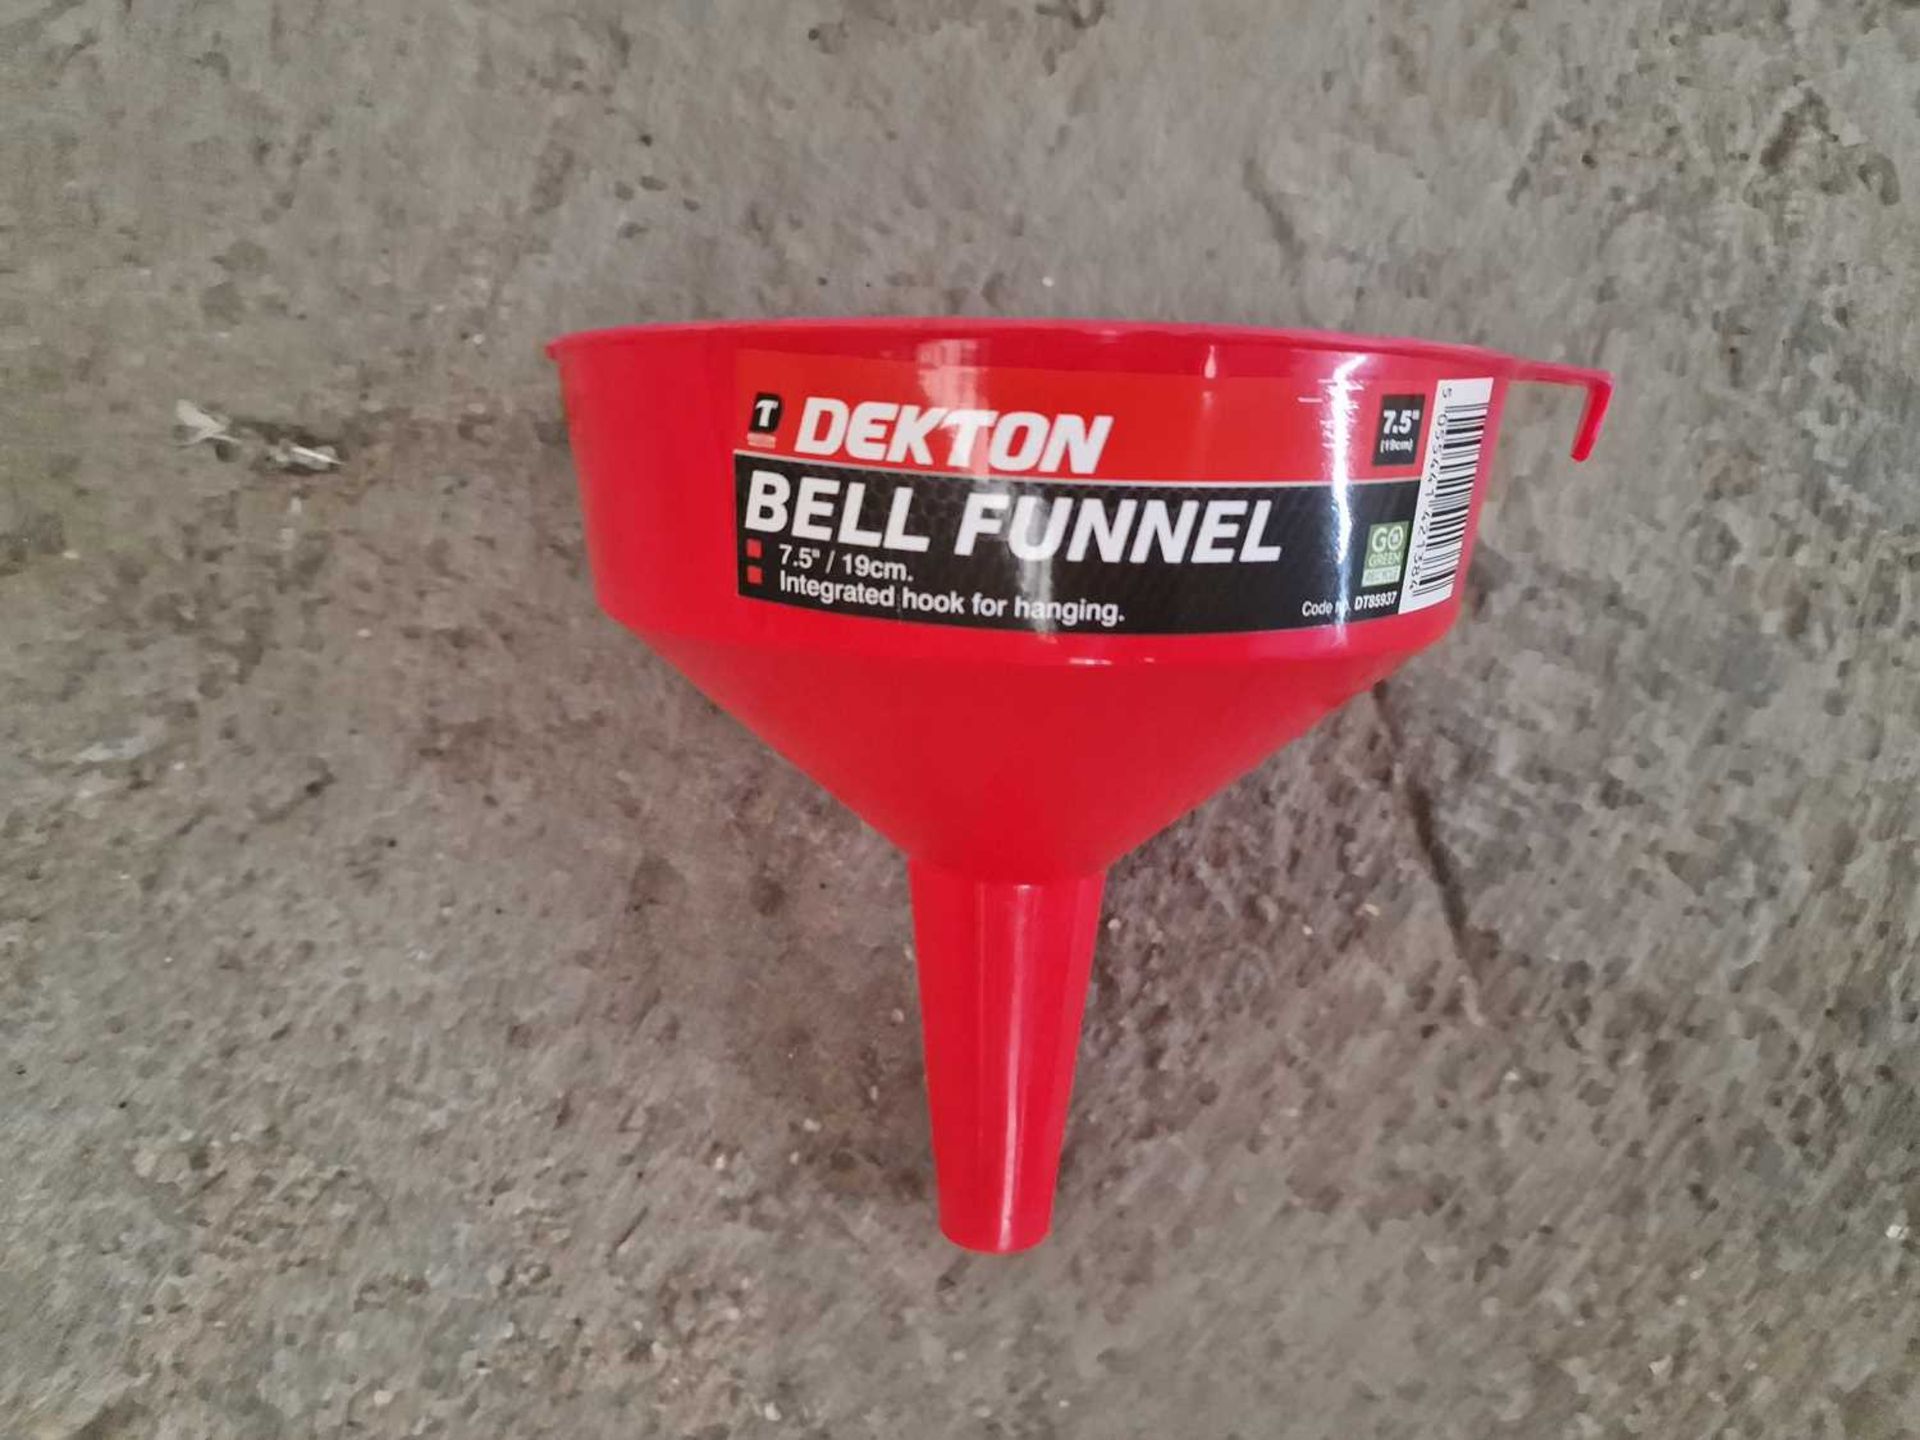 Dexton 7½" Bell Funnel (3 of) - Image 2 of 2